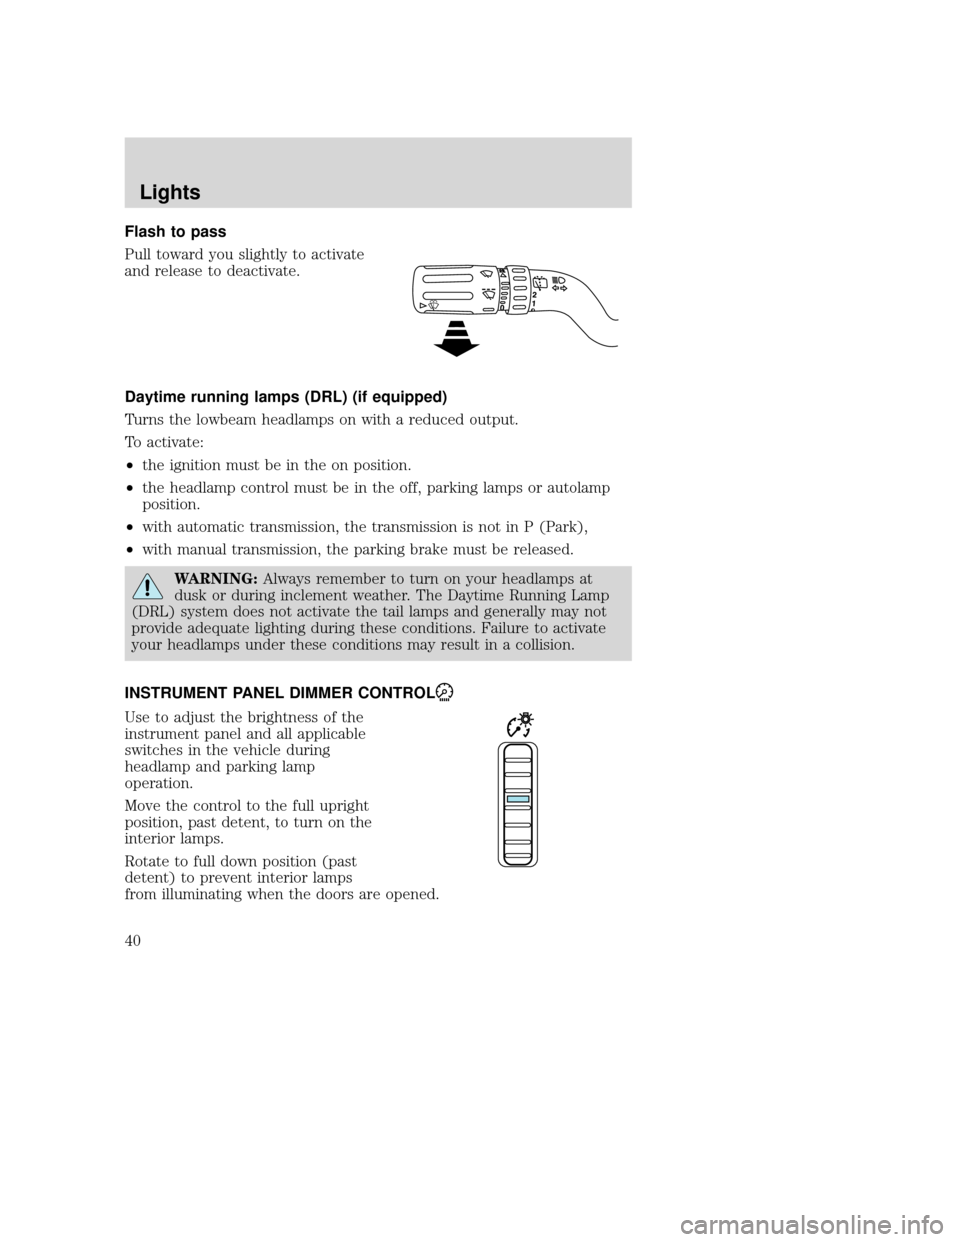 MAZDA MODEL TRIBUTE 2009  Owners Manual (in English) Flash to pass
Pull toward you slightly to activate
and release to deactivate.
Daytime running lamps (DRL) (if equipped)
Turns the lowbeam headlamps on with a reduced output.
To activate:
•the igniti